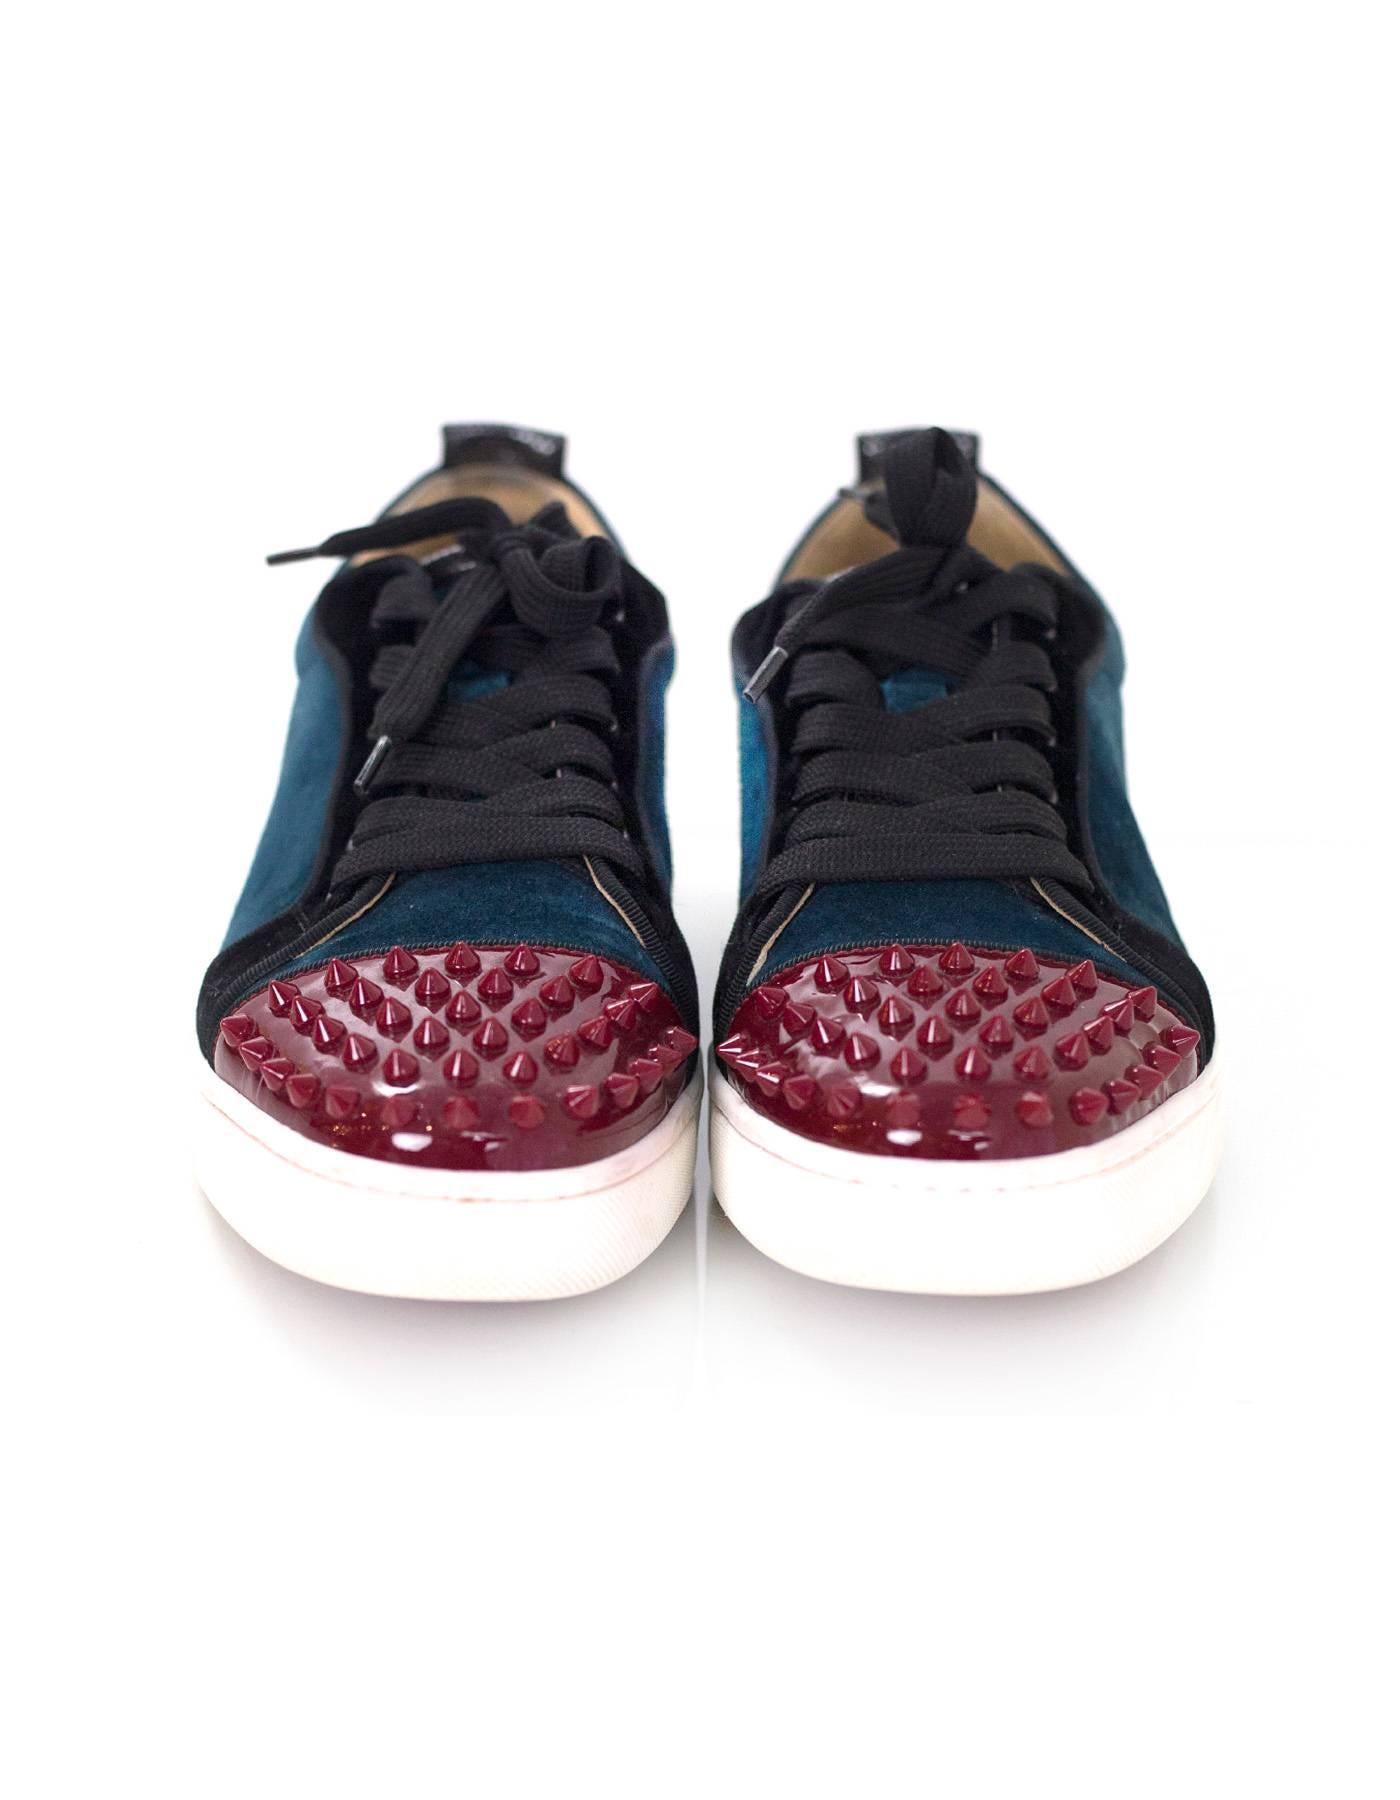 Christian Louboutin Teal & Red Louis Jr Spike Sneakers Sz 40 rt. $795 In Excellent Condition In New York, NY